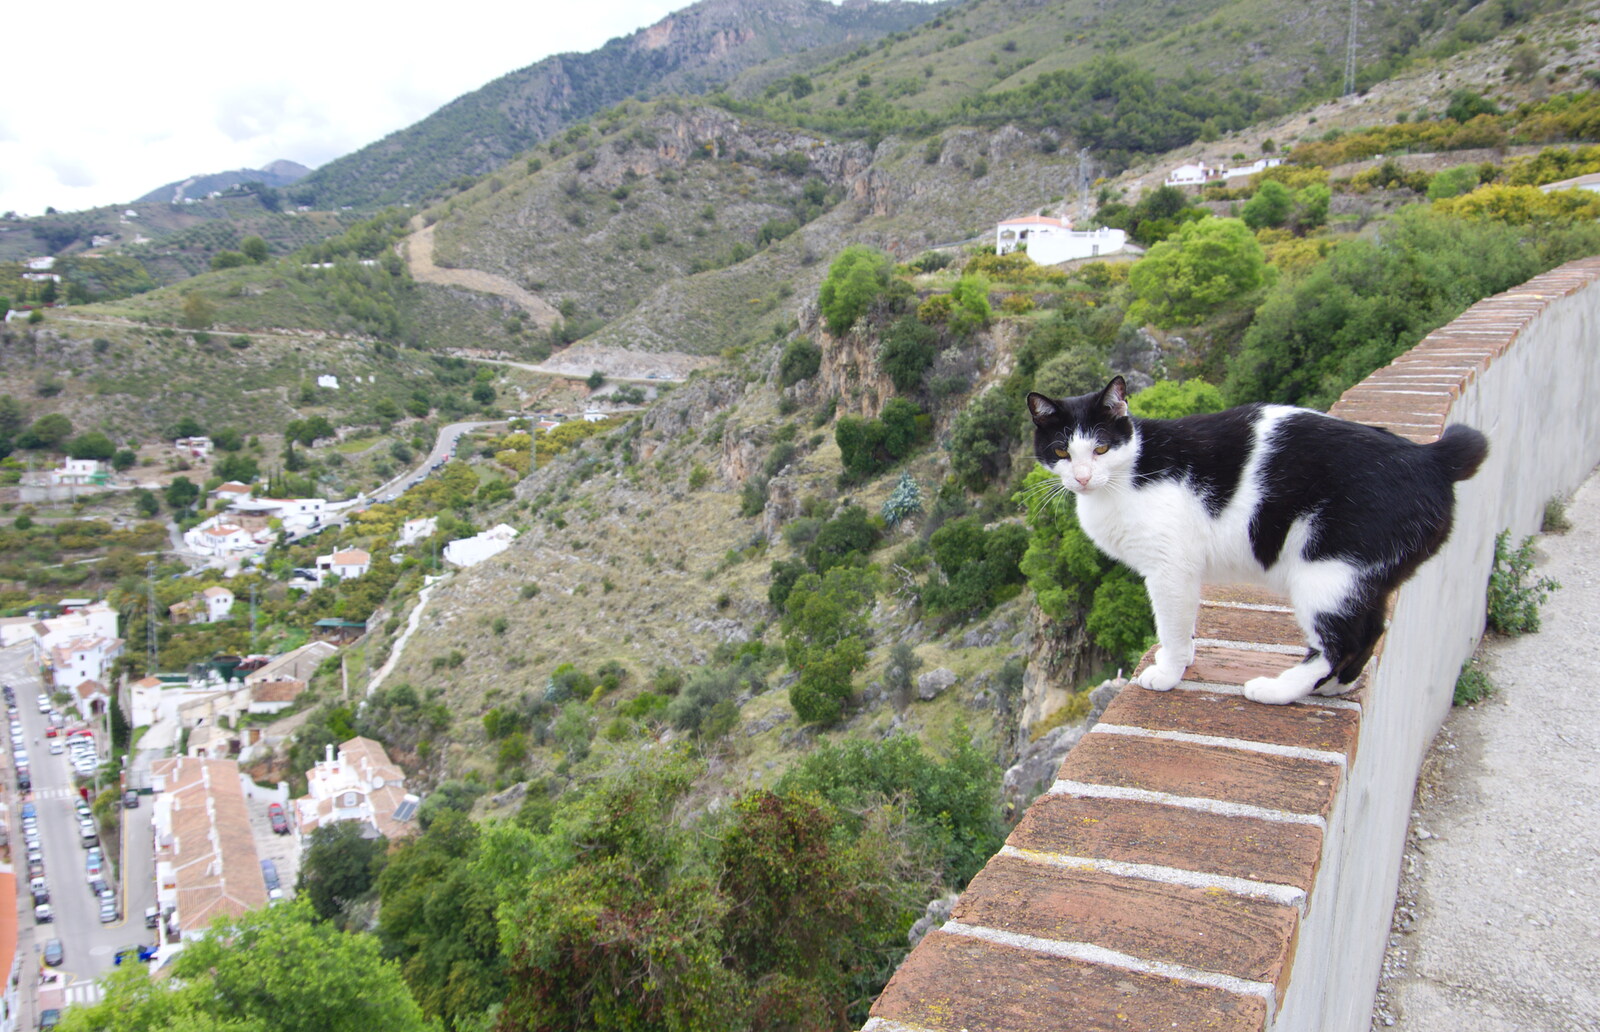 A fearless cat stands on a wall from The Caves of Nerja, and Frigiliana, Andalusia, Spain - 18th April 2019